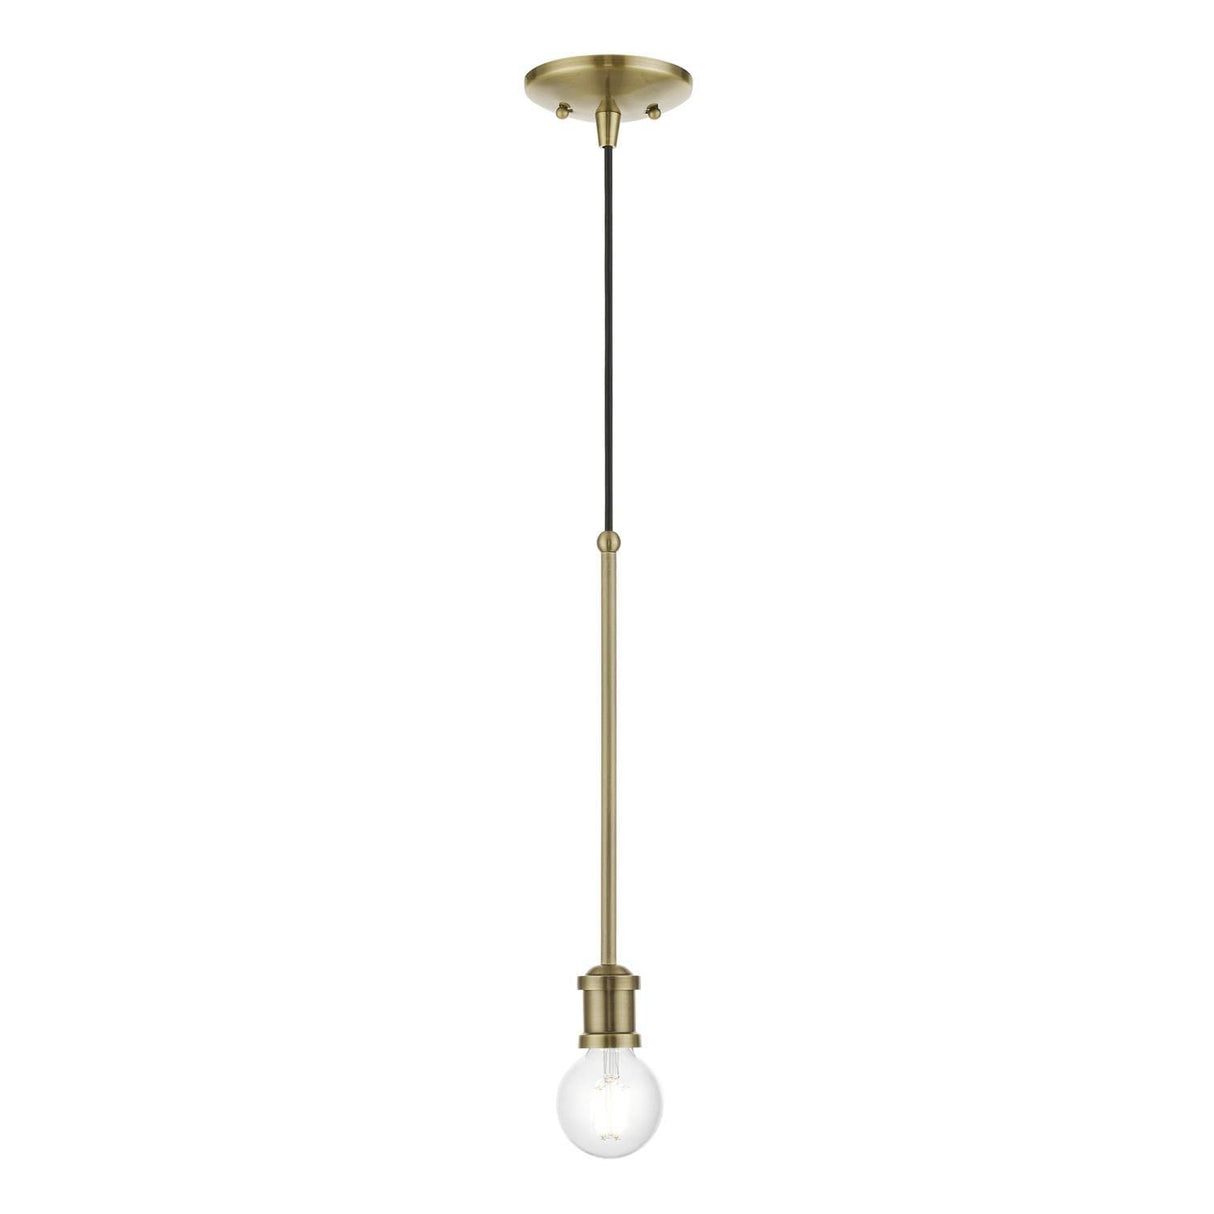 Lansdale 1 Light Pendant in Antique Brass (47161-01)